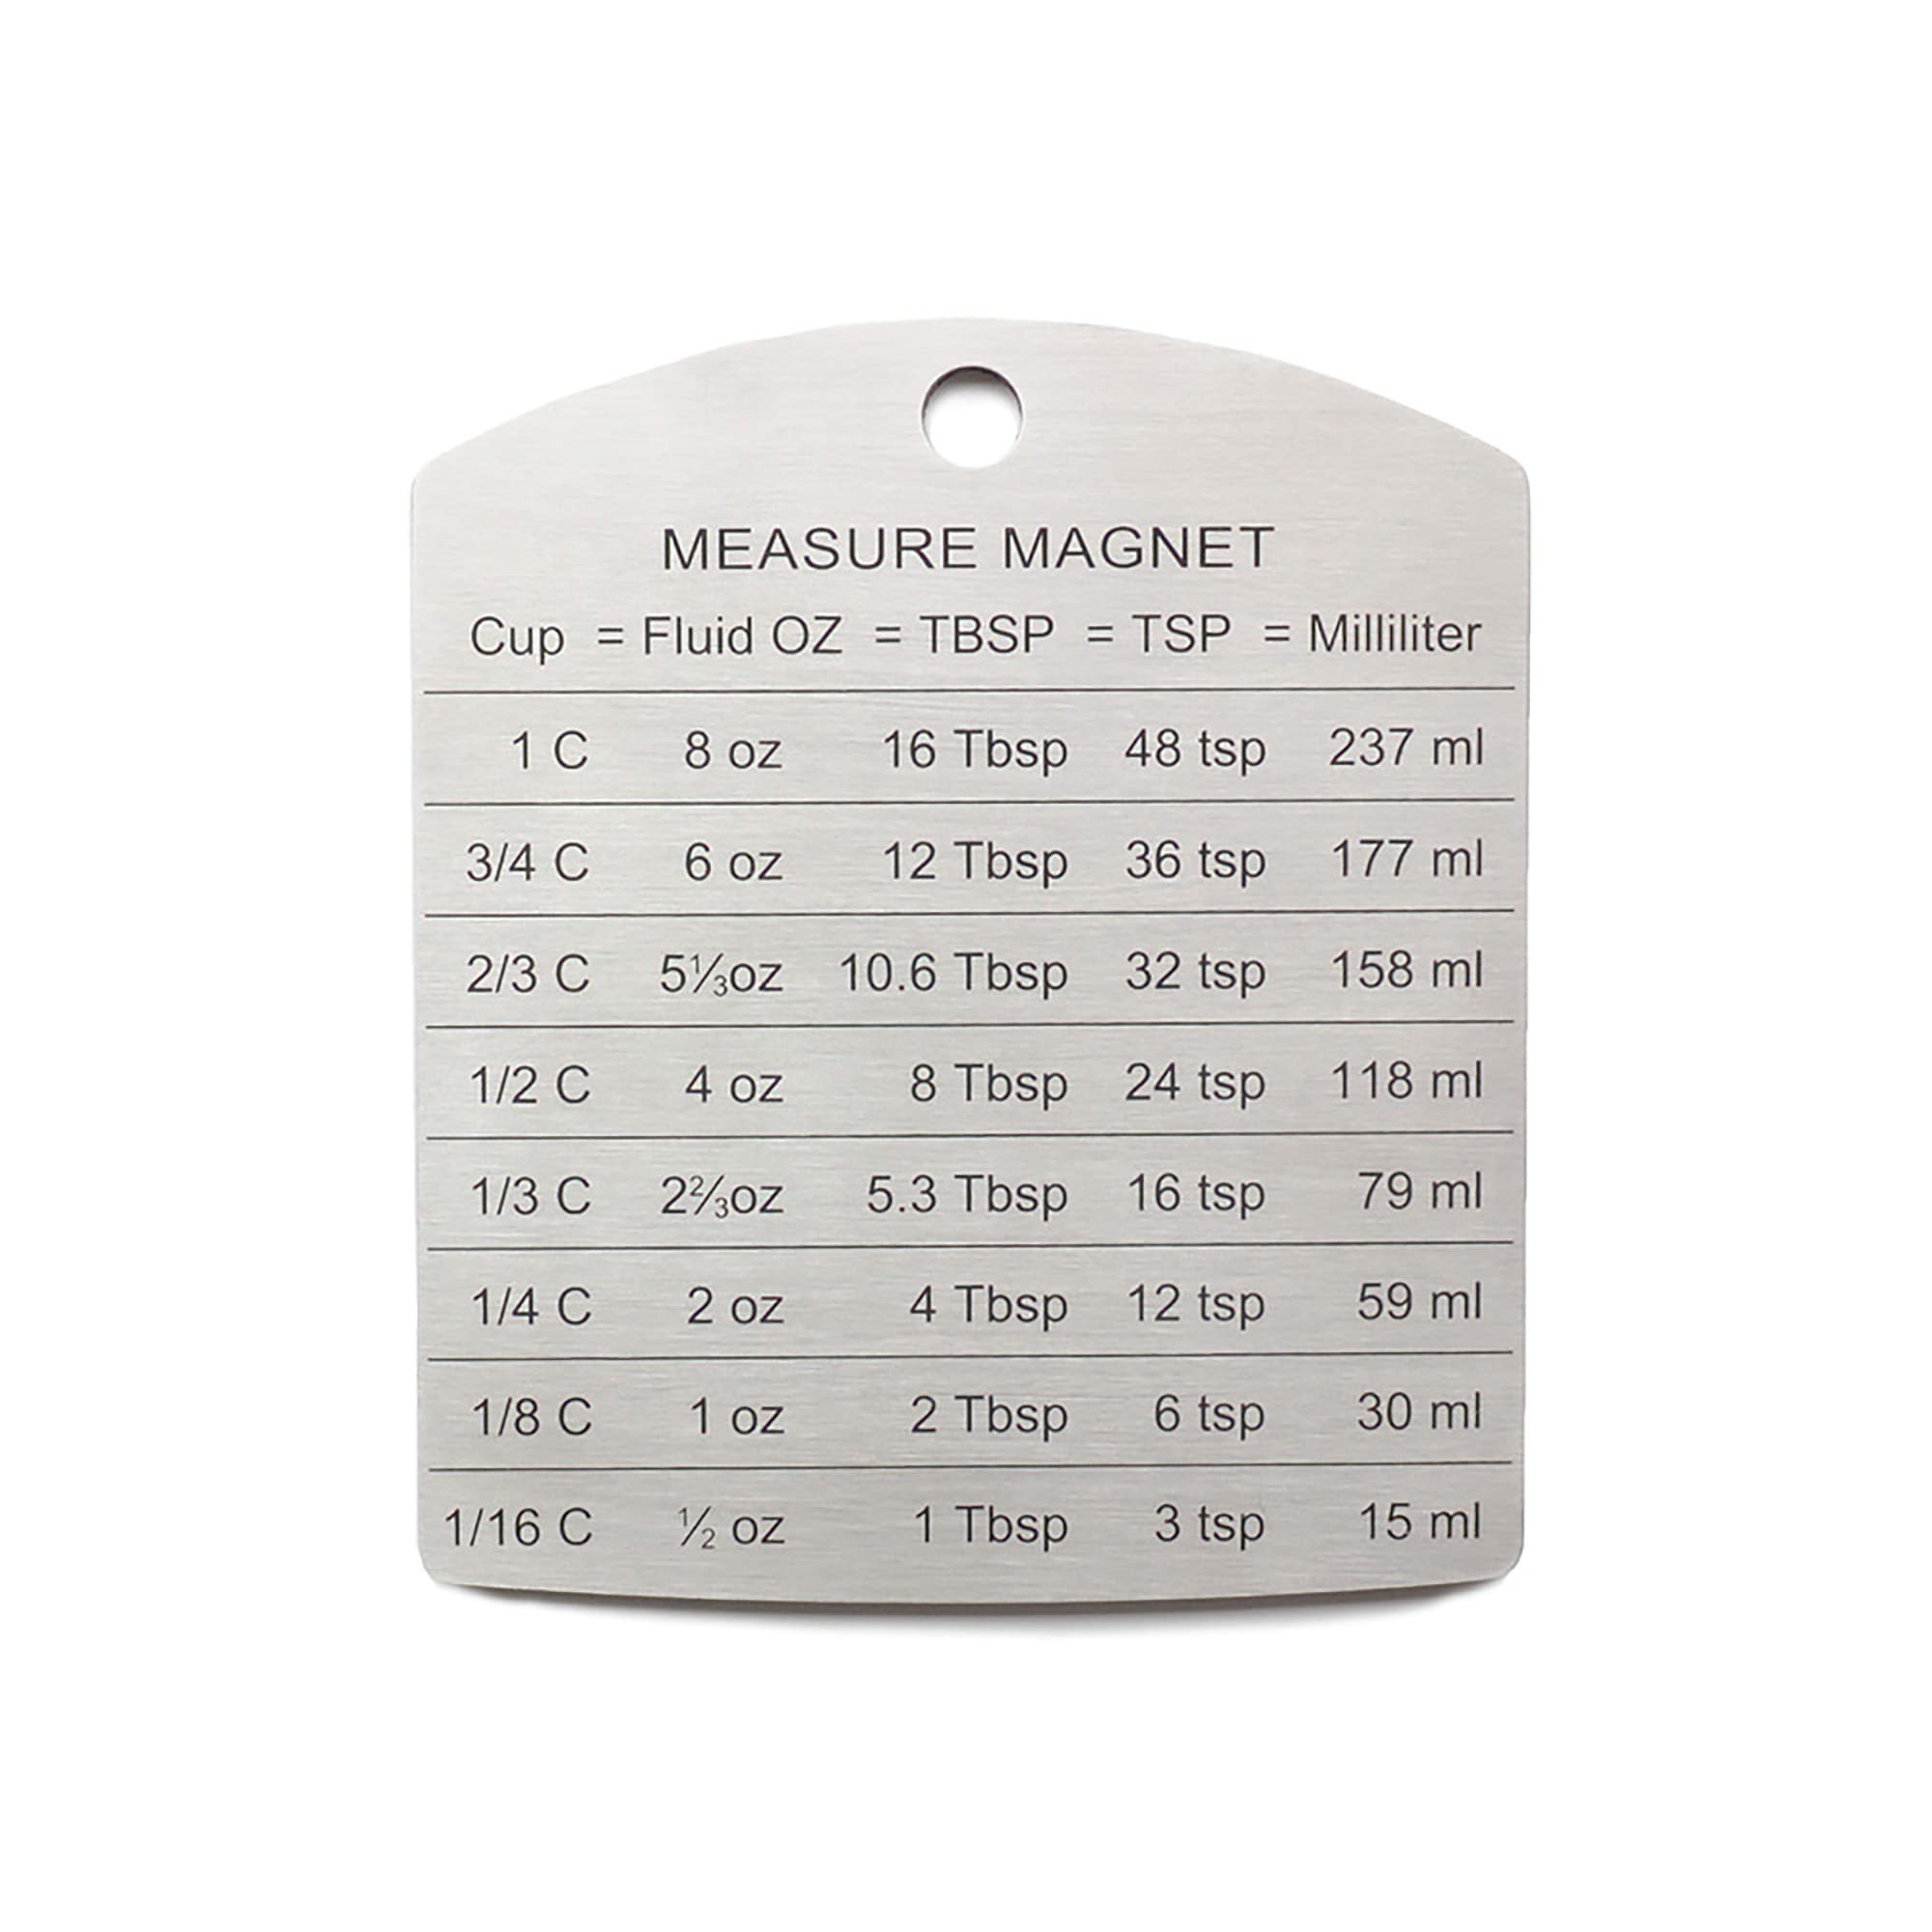 RSVP International Endurance Magnet Collection Stainless Steel, Conversion Magnet, 4.125x3.5